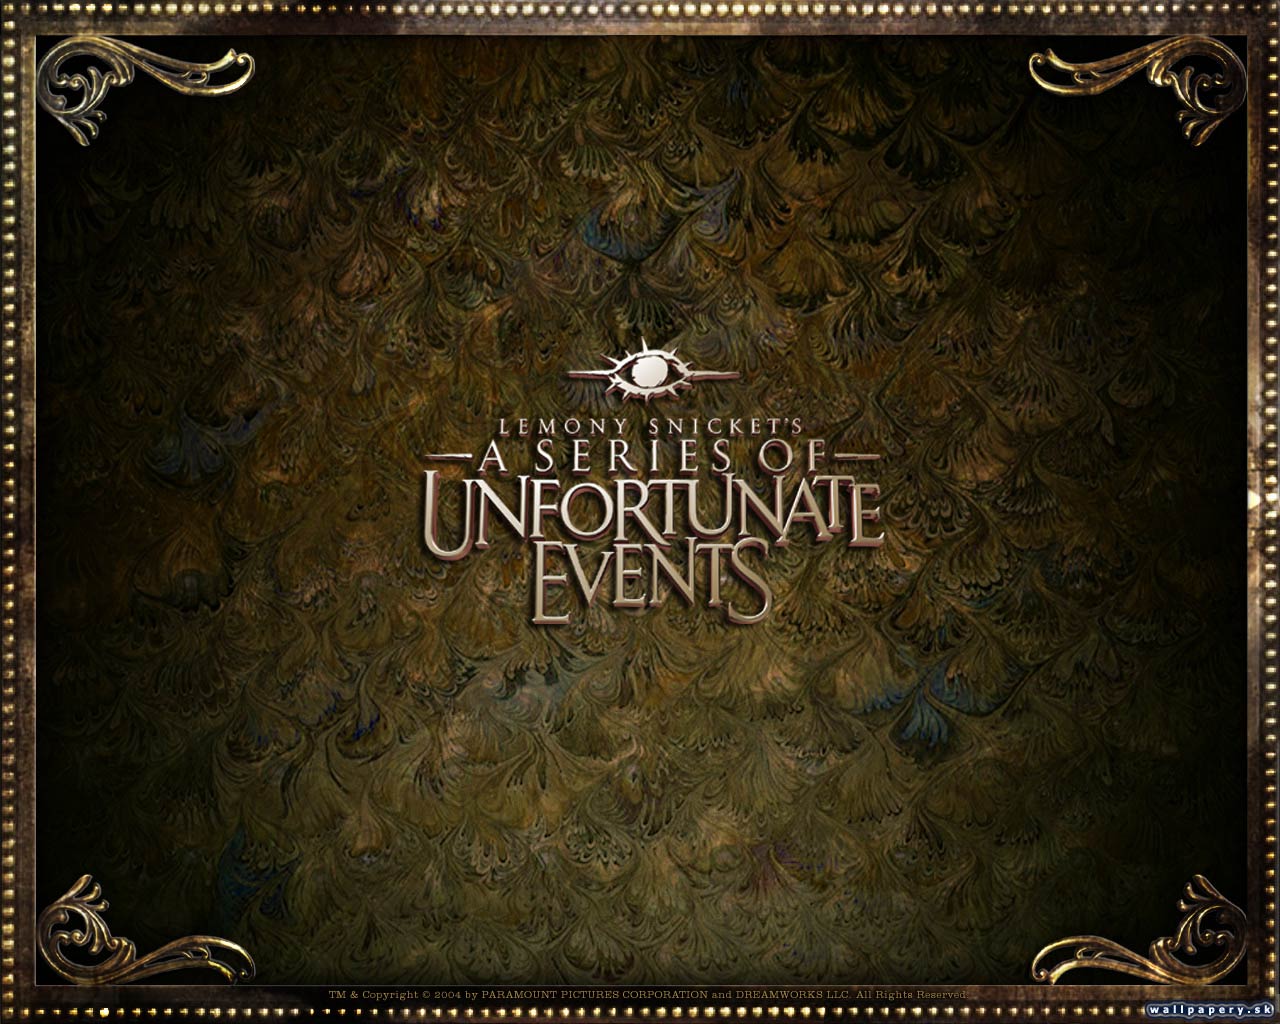 Lemony Snicket's: A Series of Unfortunate Events - wallpaper 2